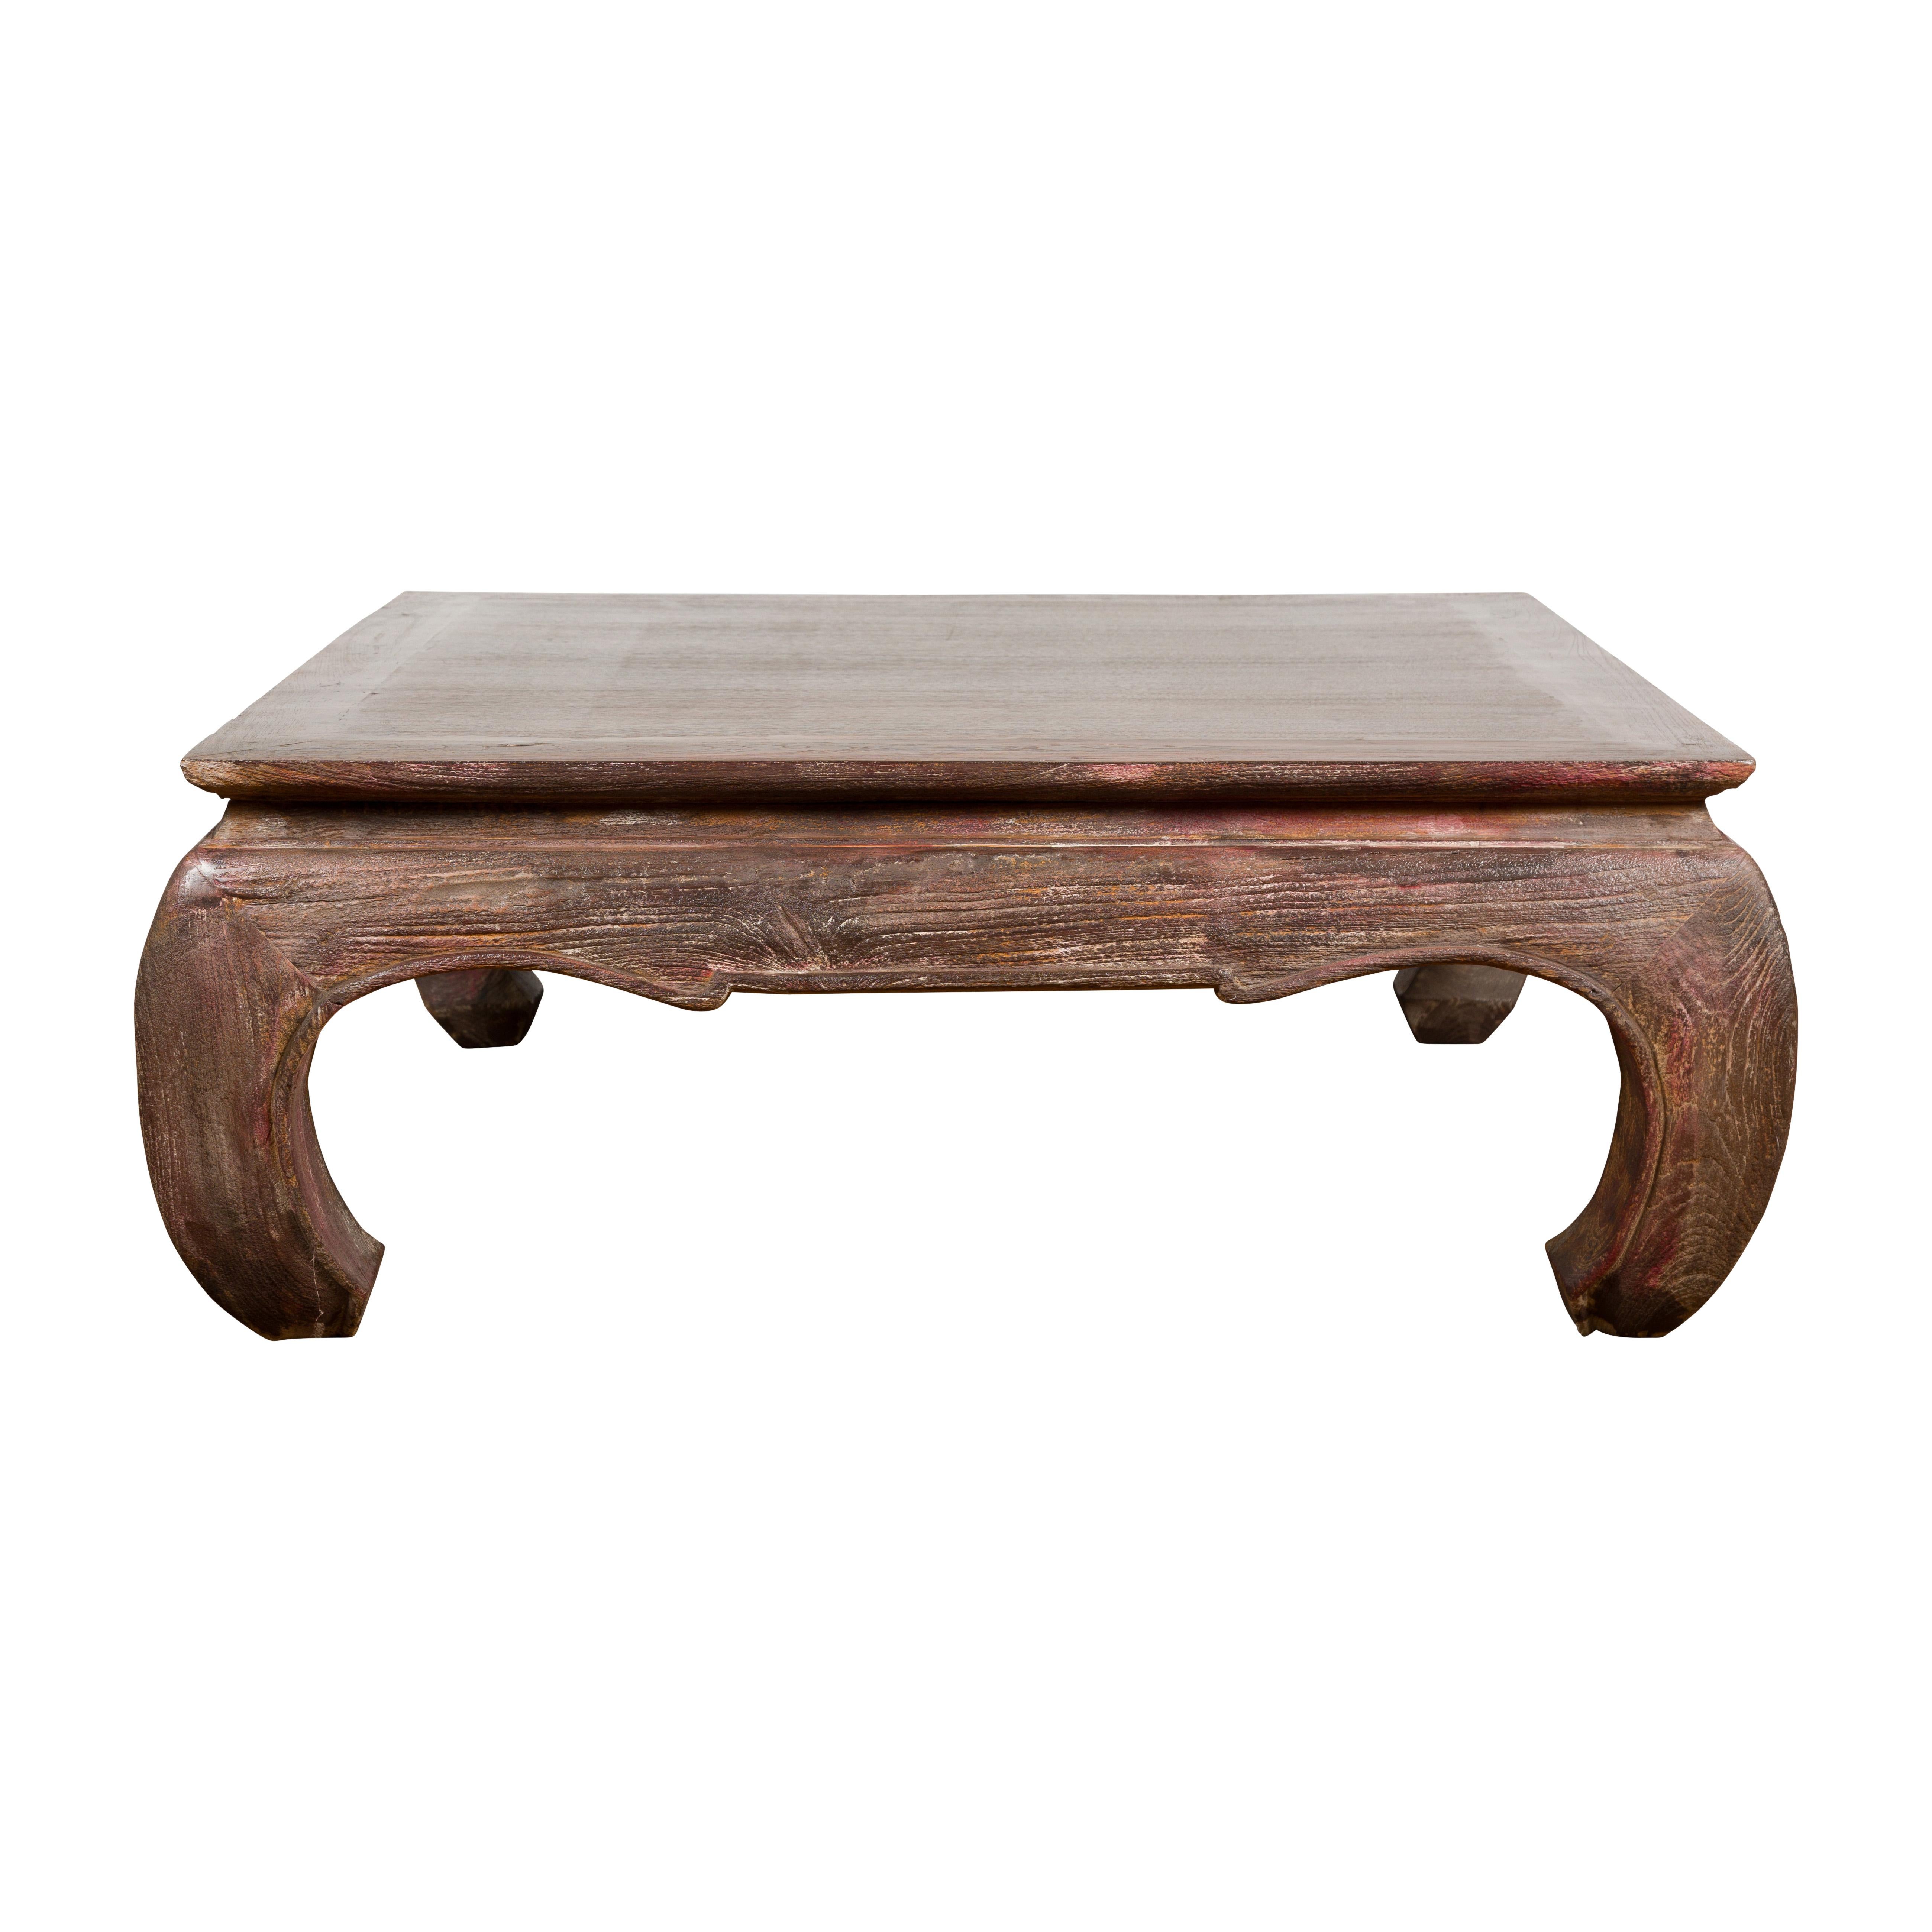 Vintage Coffee Table with Chow Legs, Carved Apron and Distressed Patina For Sale 9